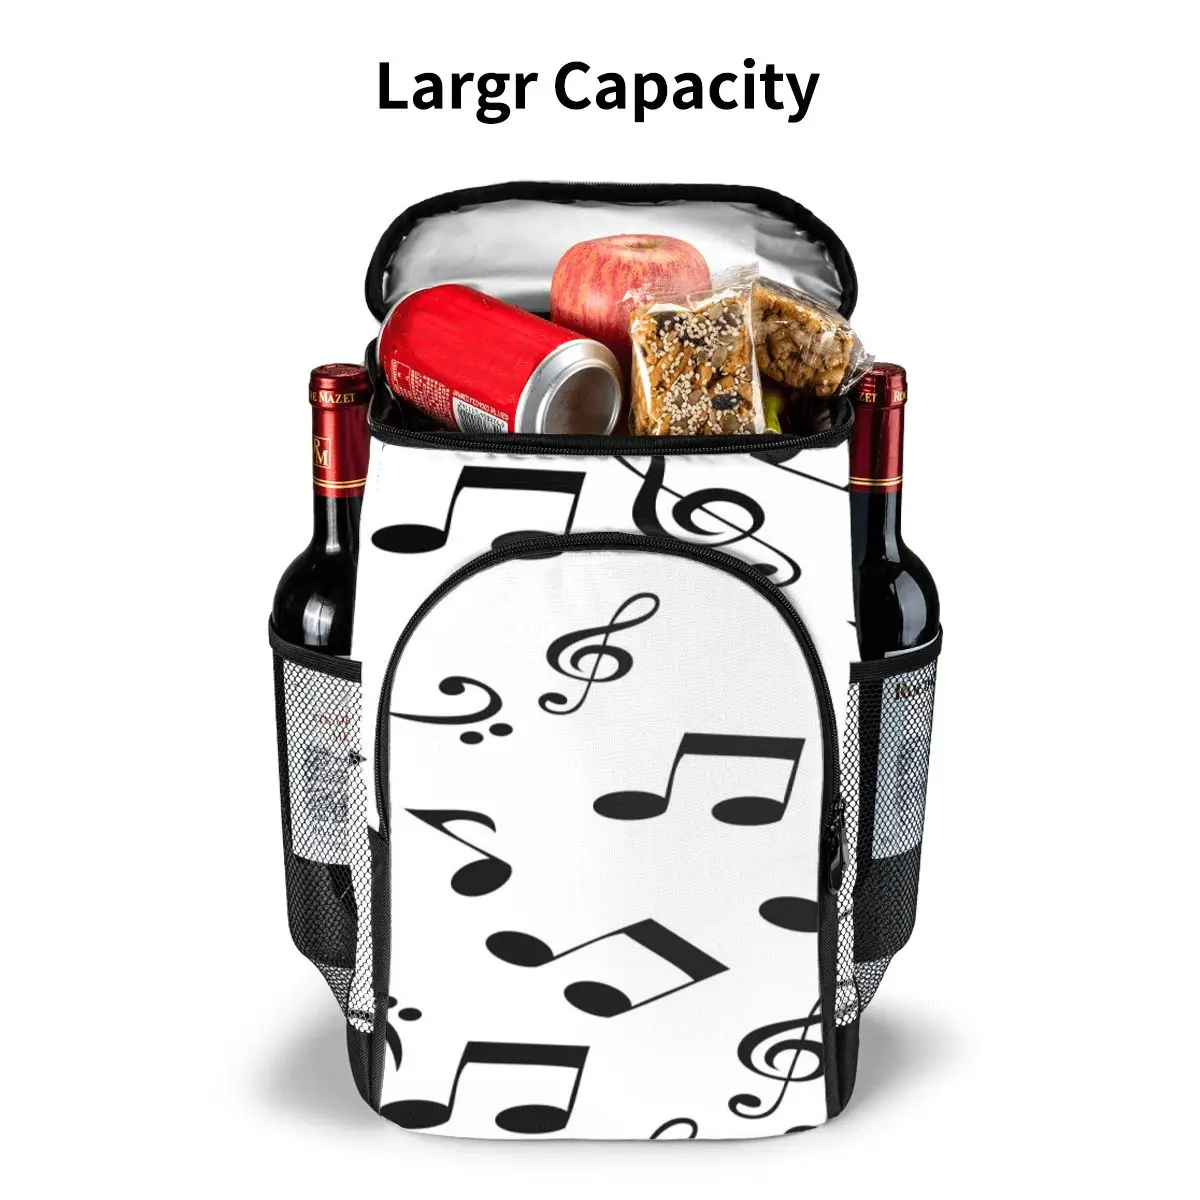 protable insulated thermal cooler waterproof lunch bag abstract music notes picnic camping backpack double shoulder wine bag free global shipping